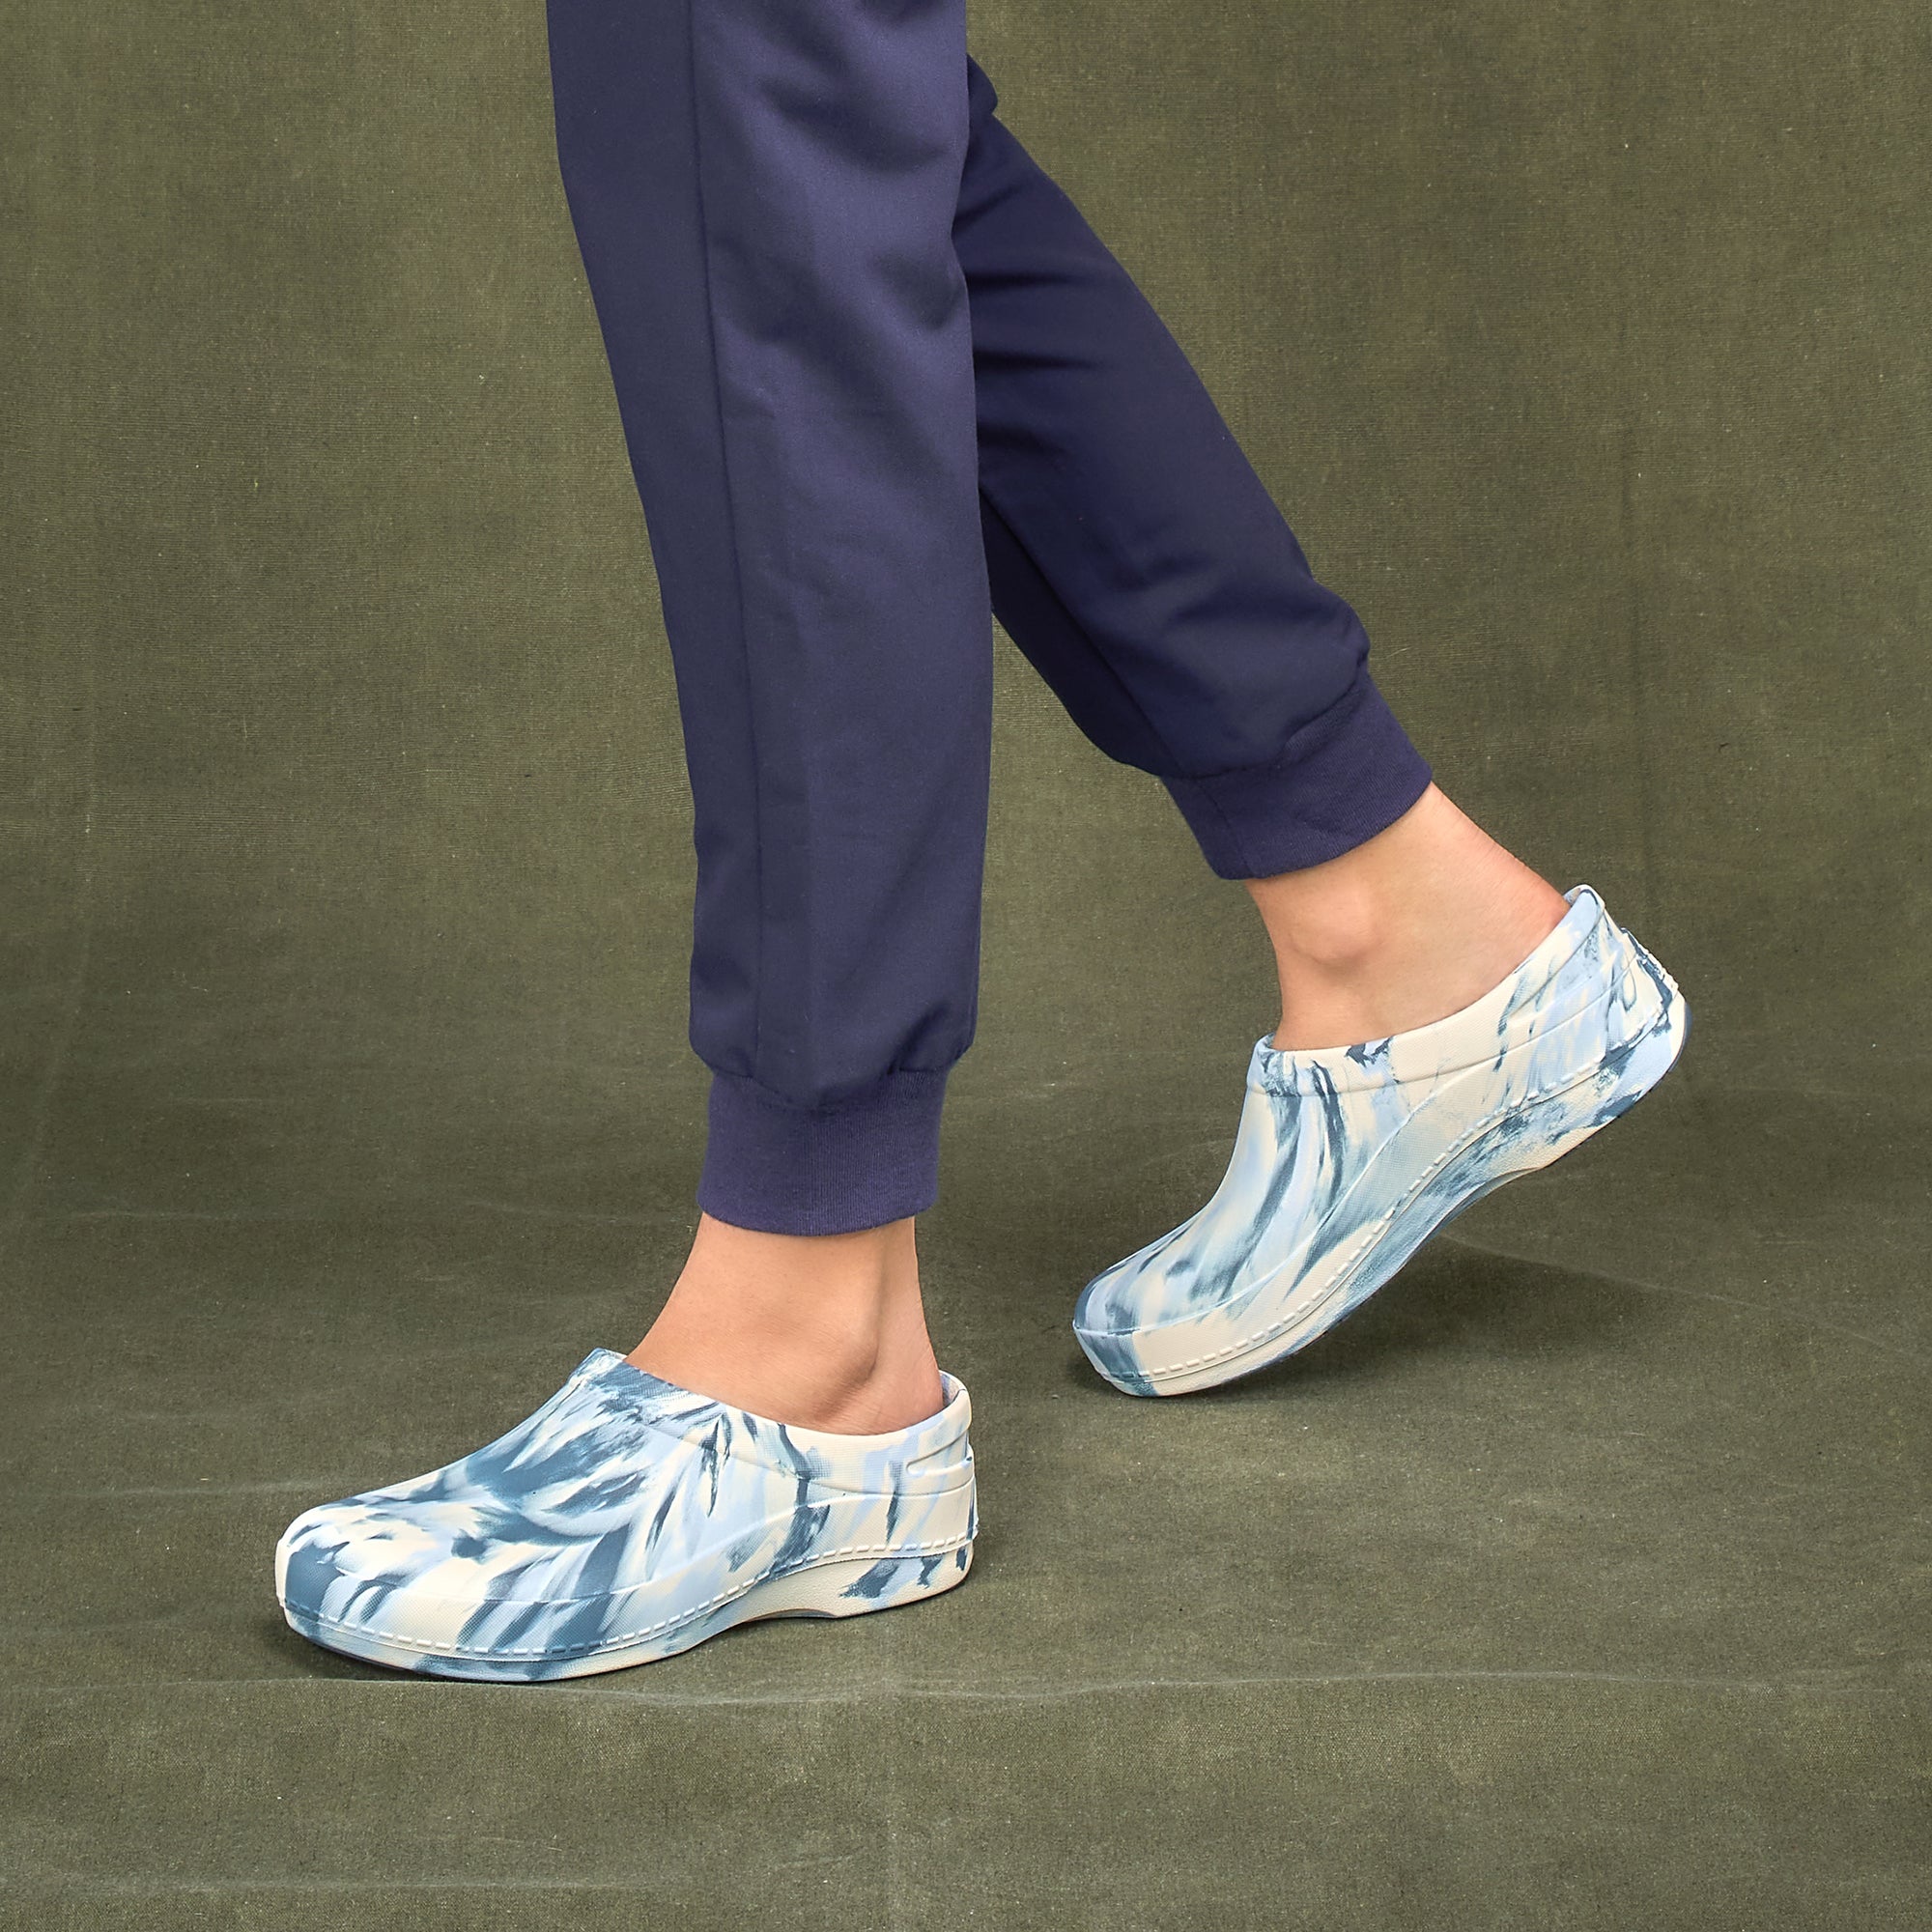 A closeup of a doctor in scrubs wearing blue and white tie-dye molded clogs with slip resistance.